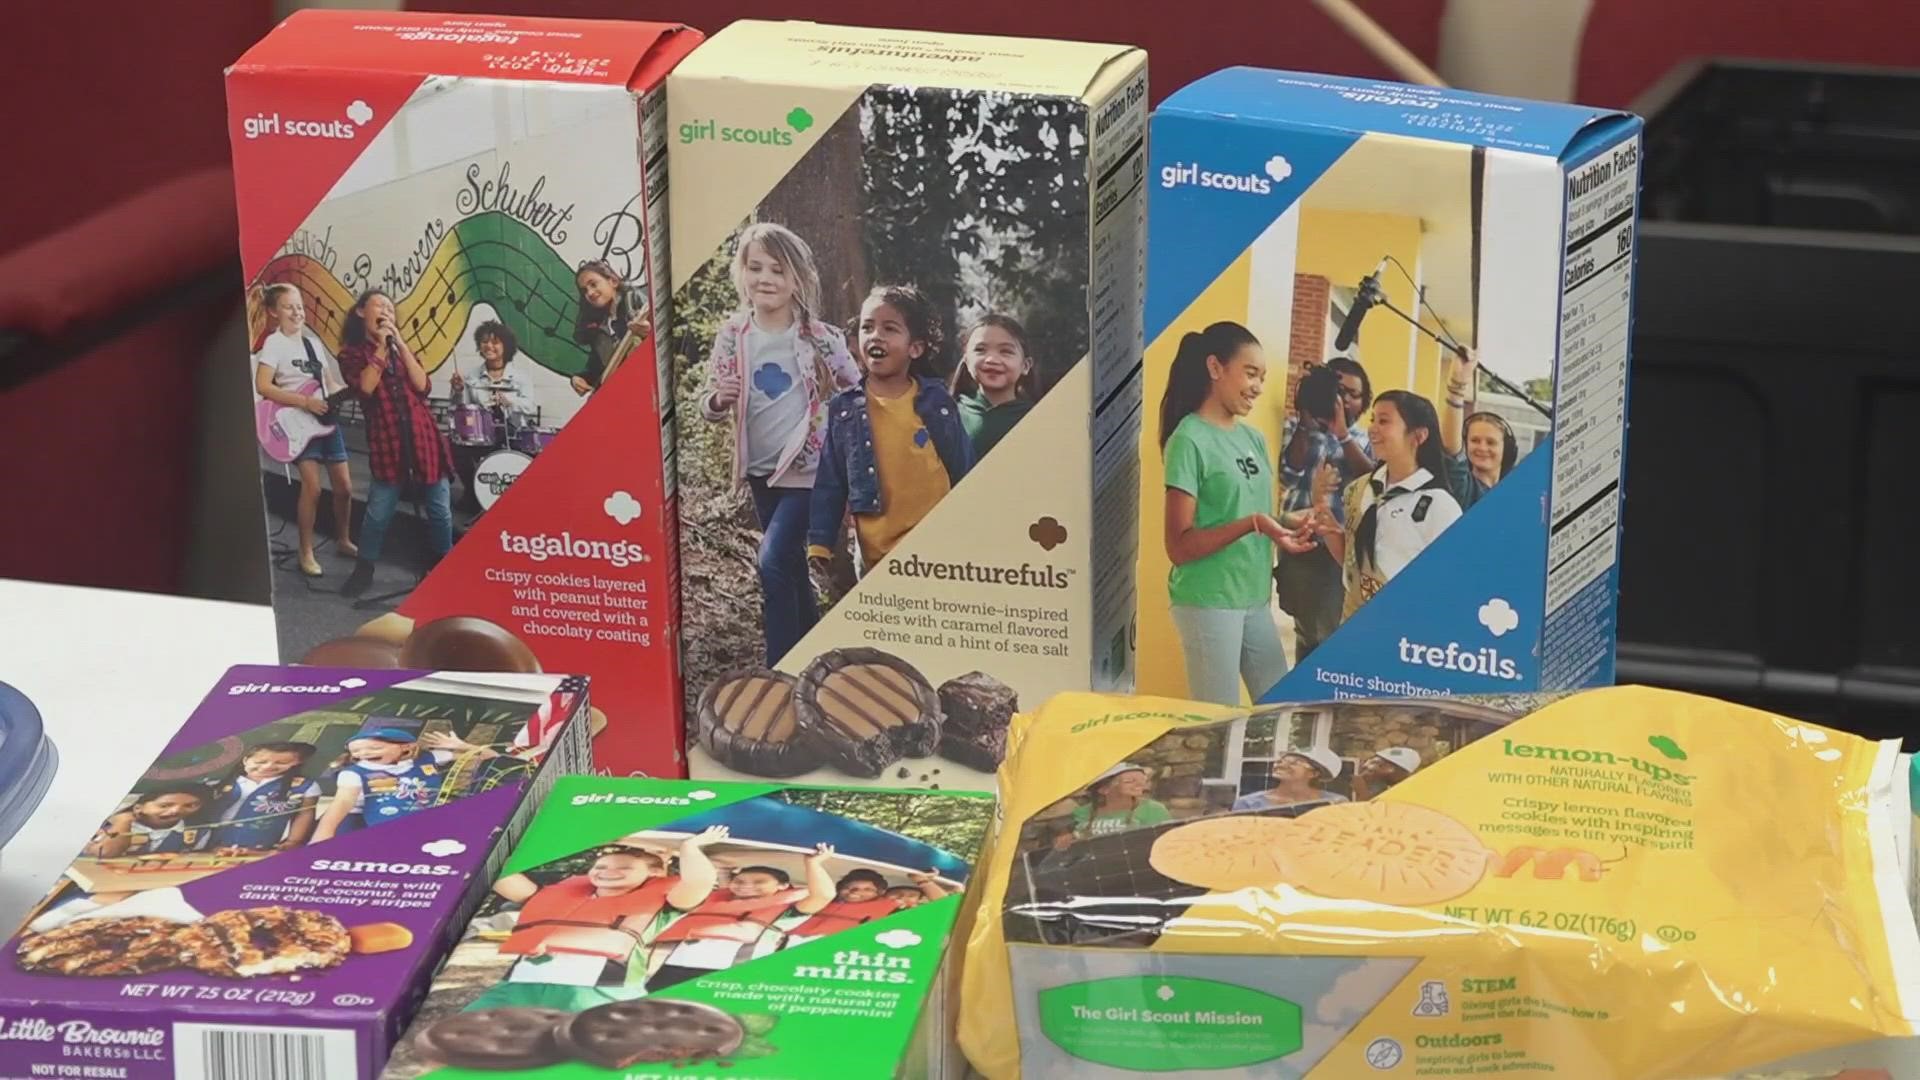 Last year, the East Tennessee Girl Scout troop sold around 12,000 boxes. This year, they're helping to sell even more.